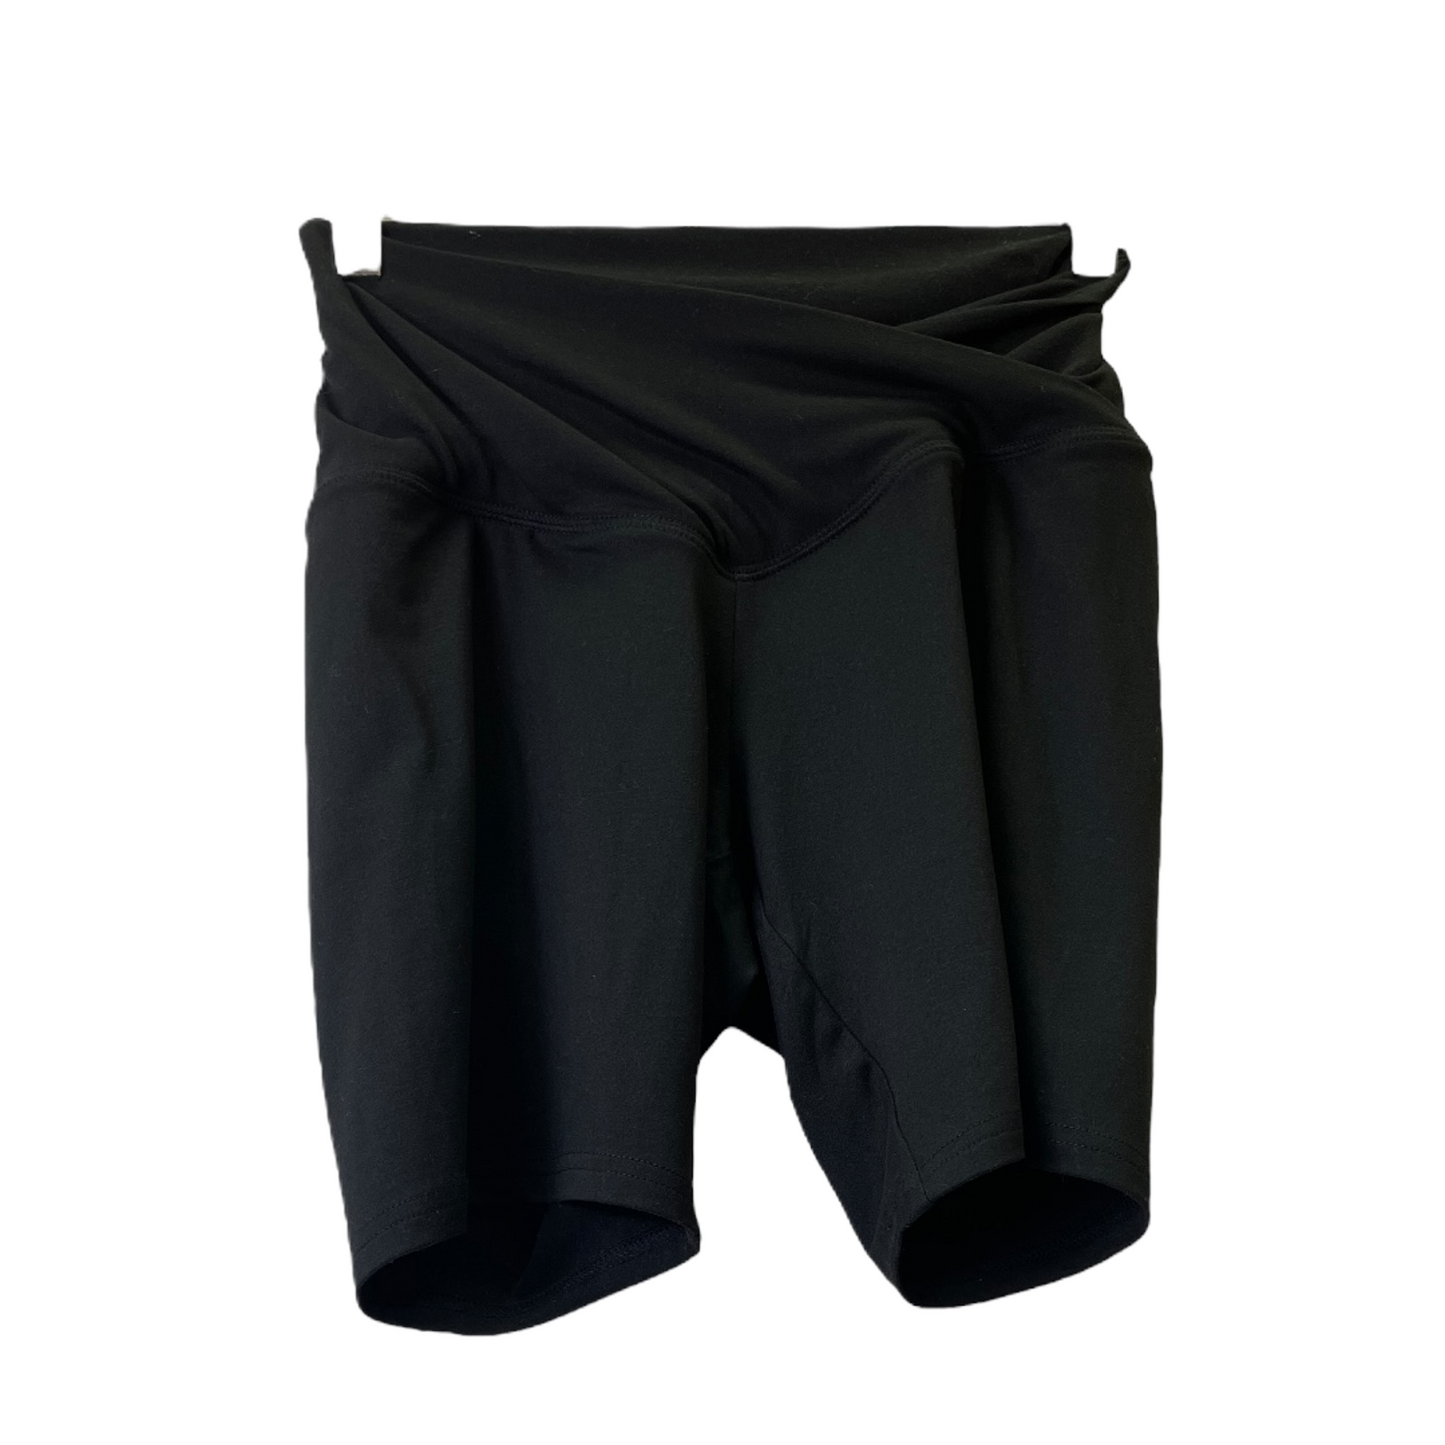 Black Shorts By Wild Fable, Size: L